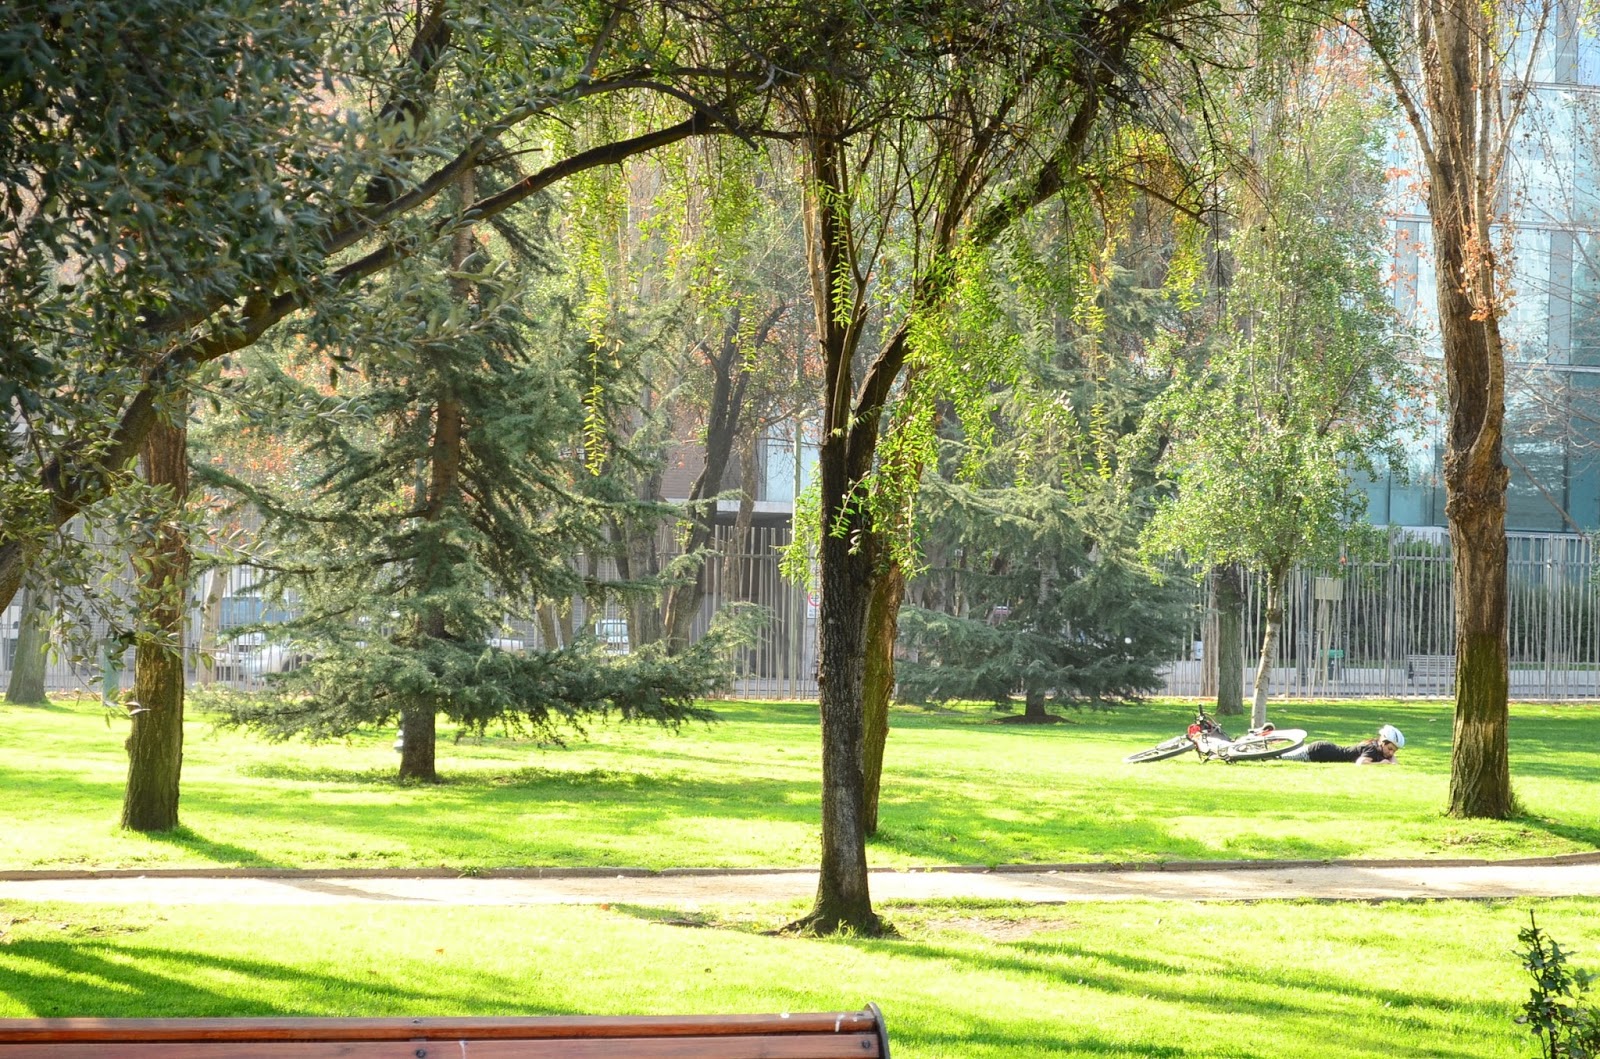 The Practical Mom: Child friendly Chile: Restrooms, Creches, Parks & Zoos in Santiago